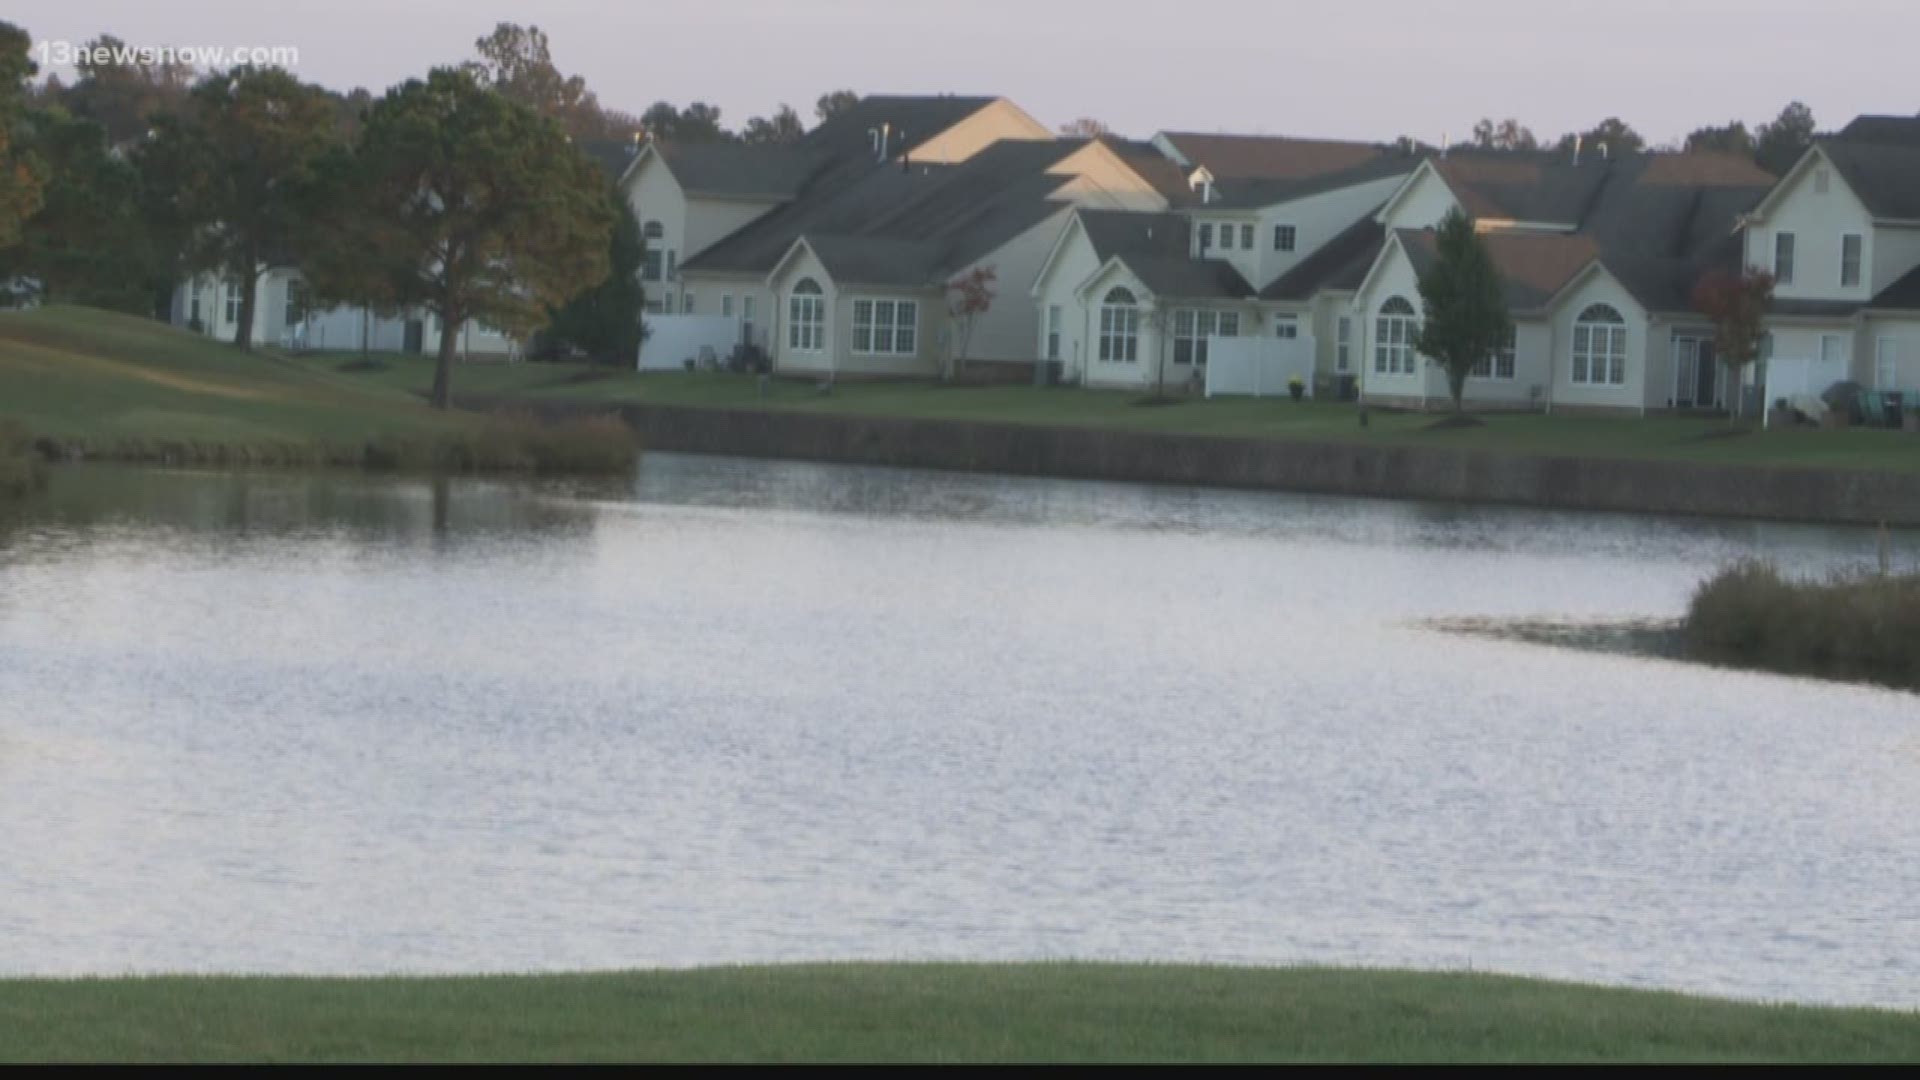 Many golfers were greeted by a sign telling them the Chesapeake course is closed for good.